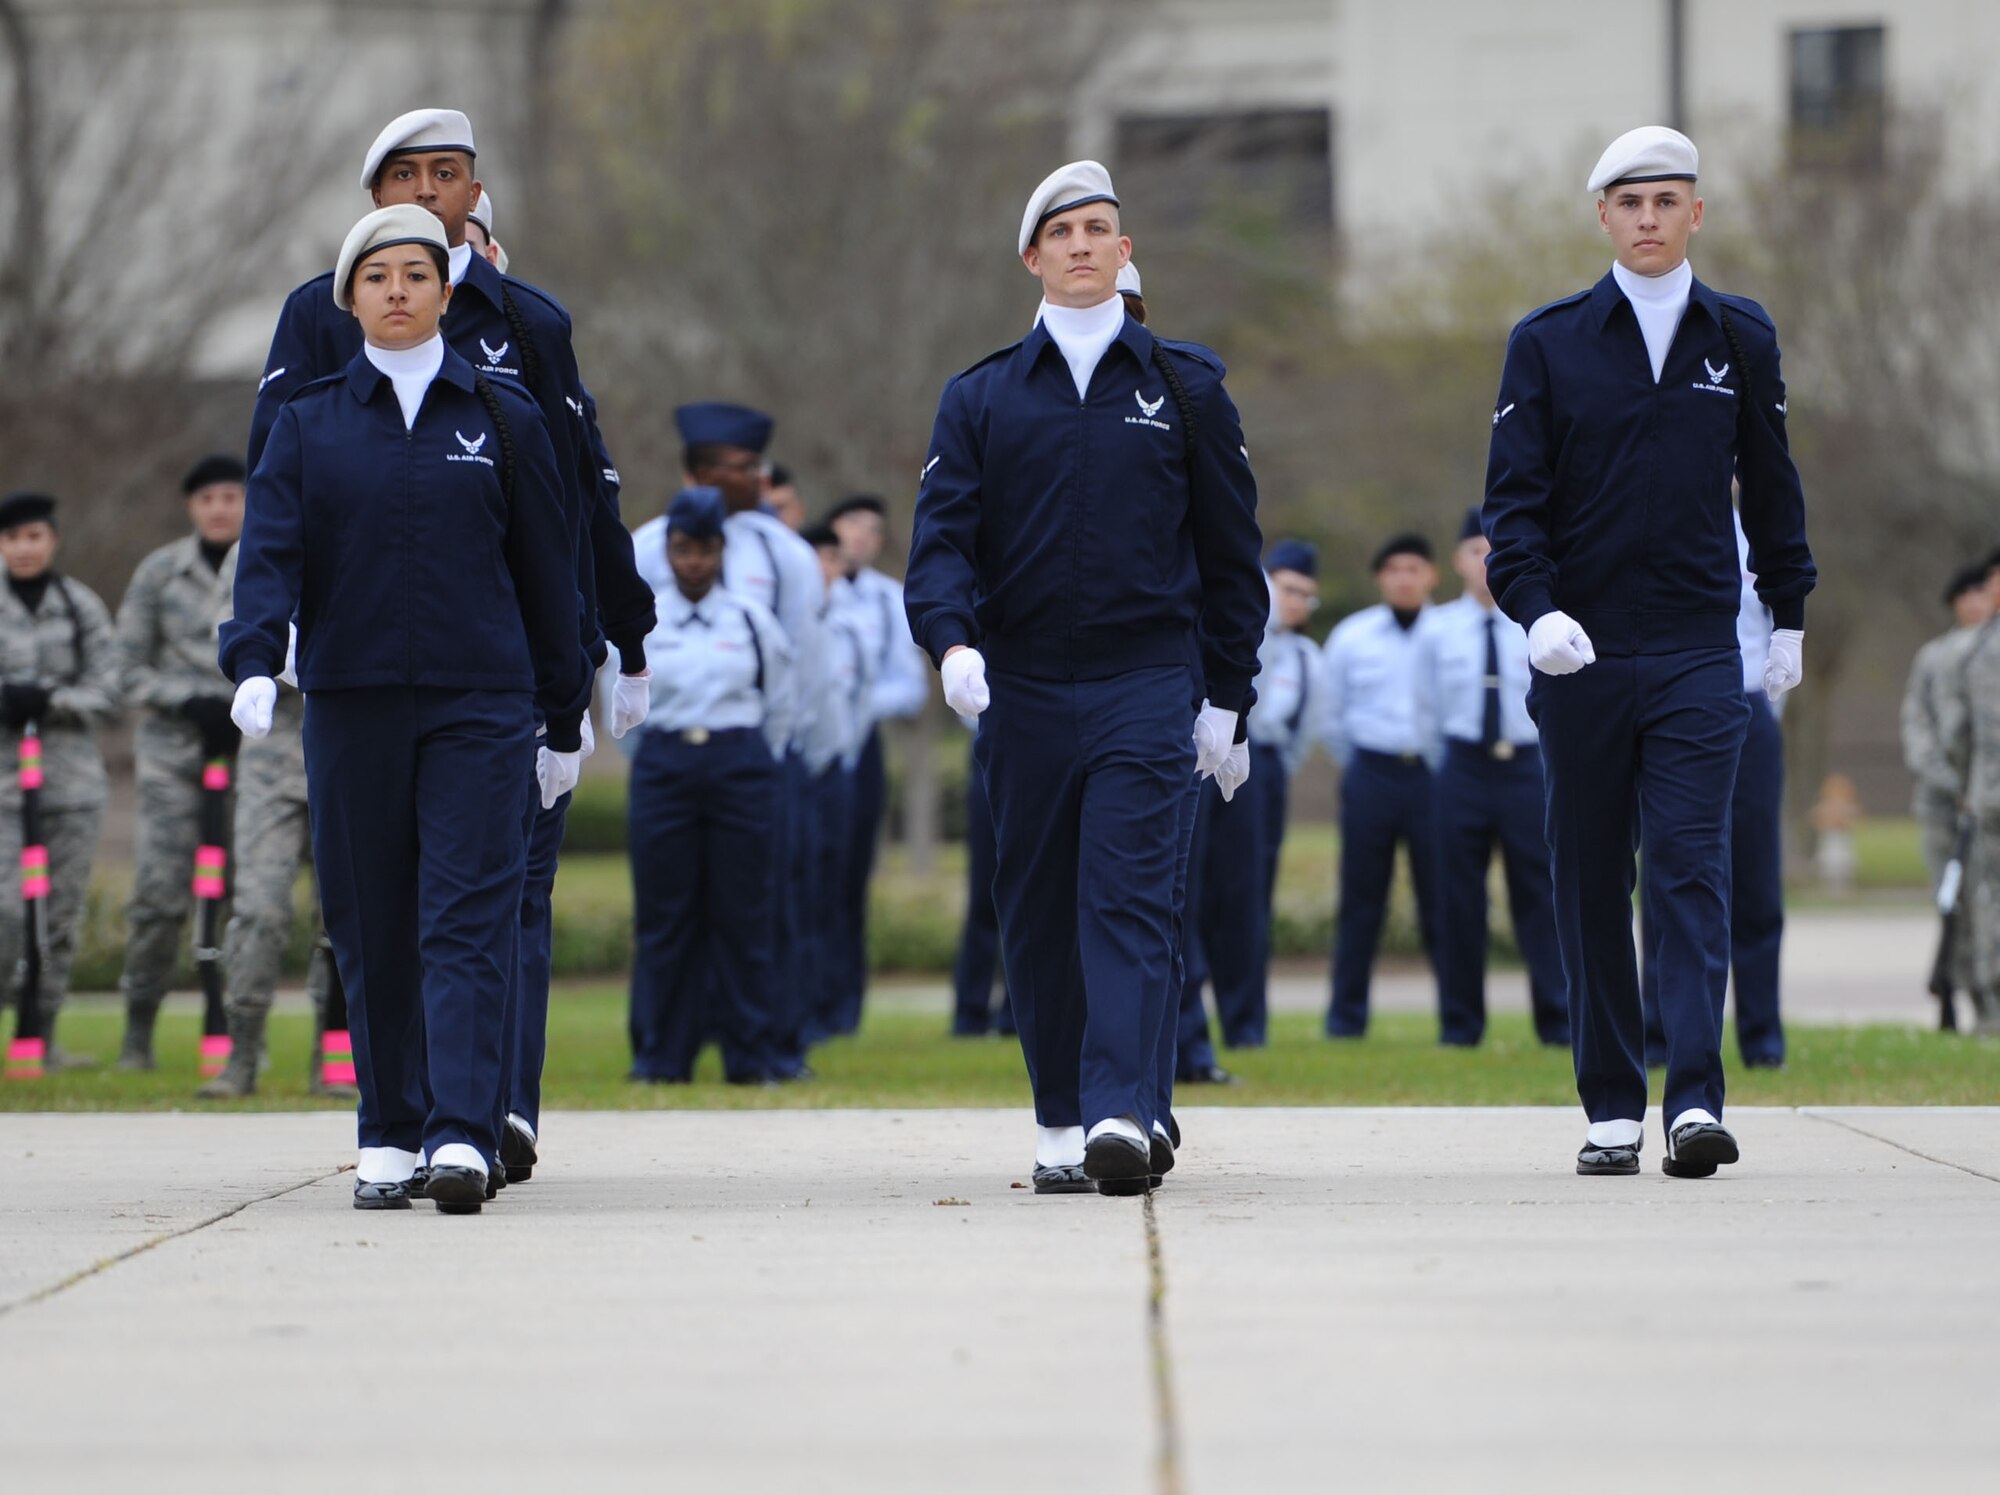 Members of the 334th Training Squadron regulation drill team perform during the 81st Training Group drill down at the Levitow Training Support Facility drill pad March 10, 2017, on Keesler Air Force Base, Miss. Airmen from the 81st TRG competed in a quarterly open ranks inspection, regulation drill routine and freestyle drill routine with the 334th TRS “Gators” taking first place. (U.S. Air Force photo by Kemberly Groue)